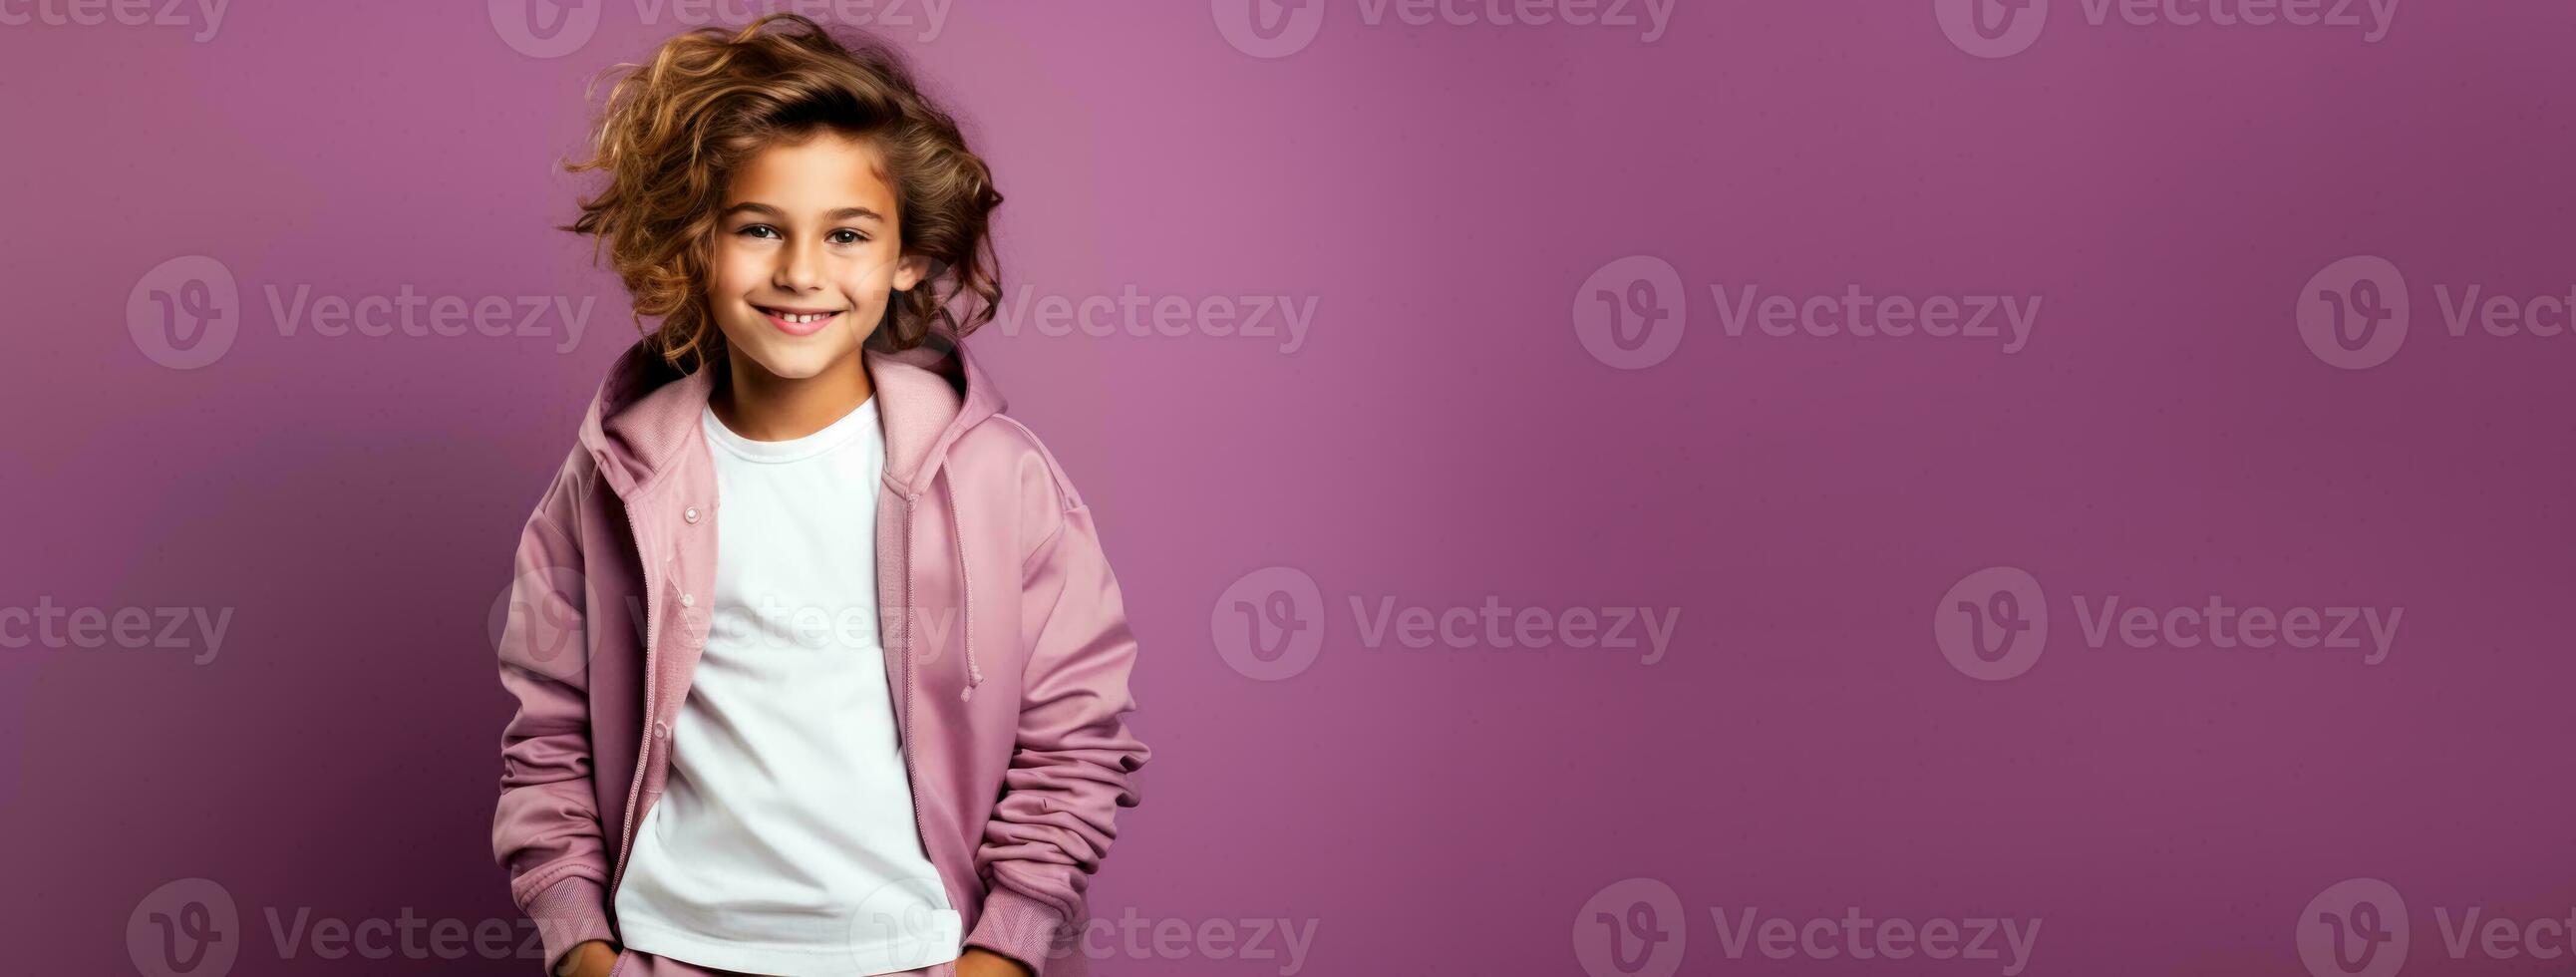 Fashion week kid model isolated on gradient background with a place for text photo